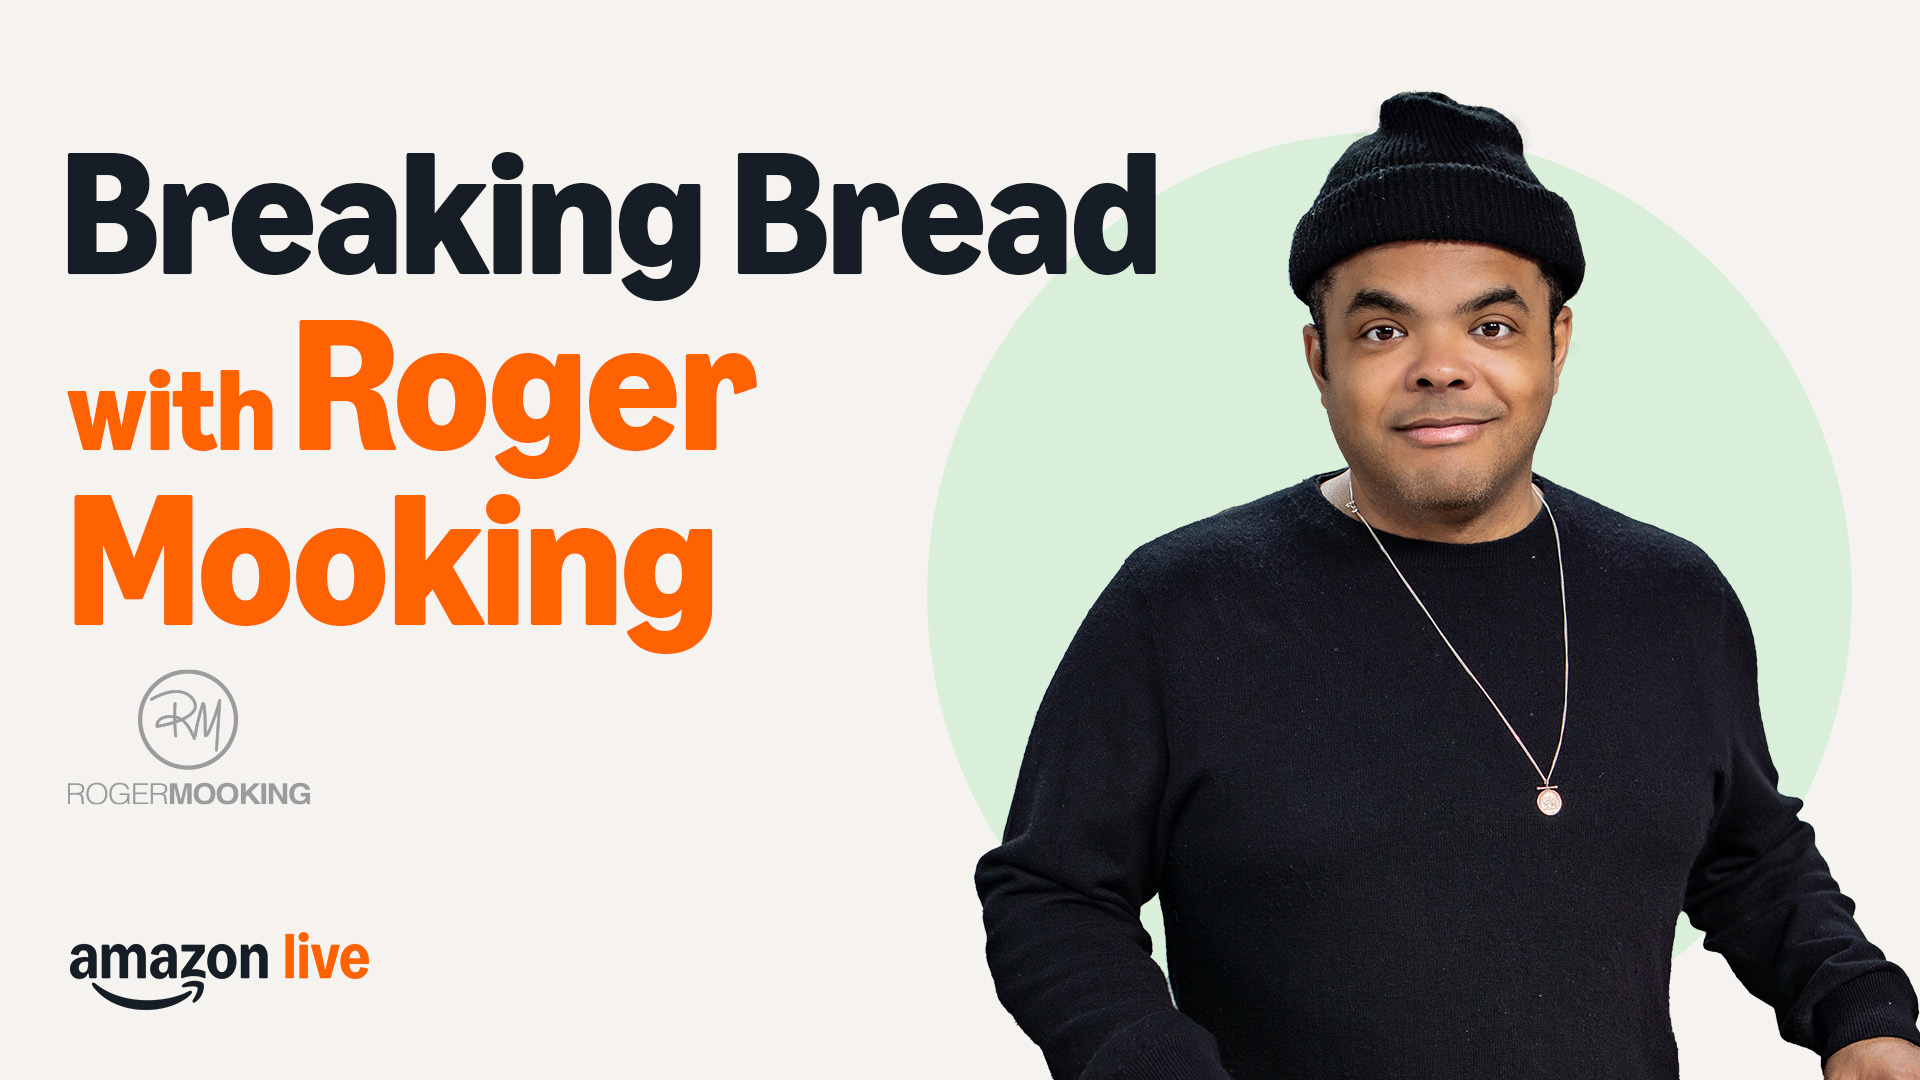 Breaking Bread with Roger Mooking